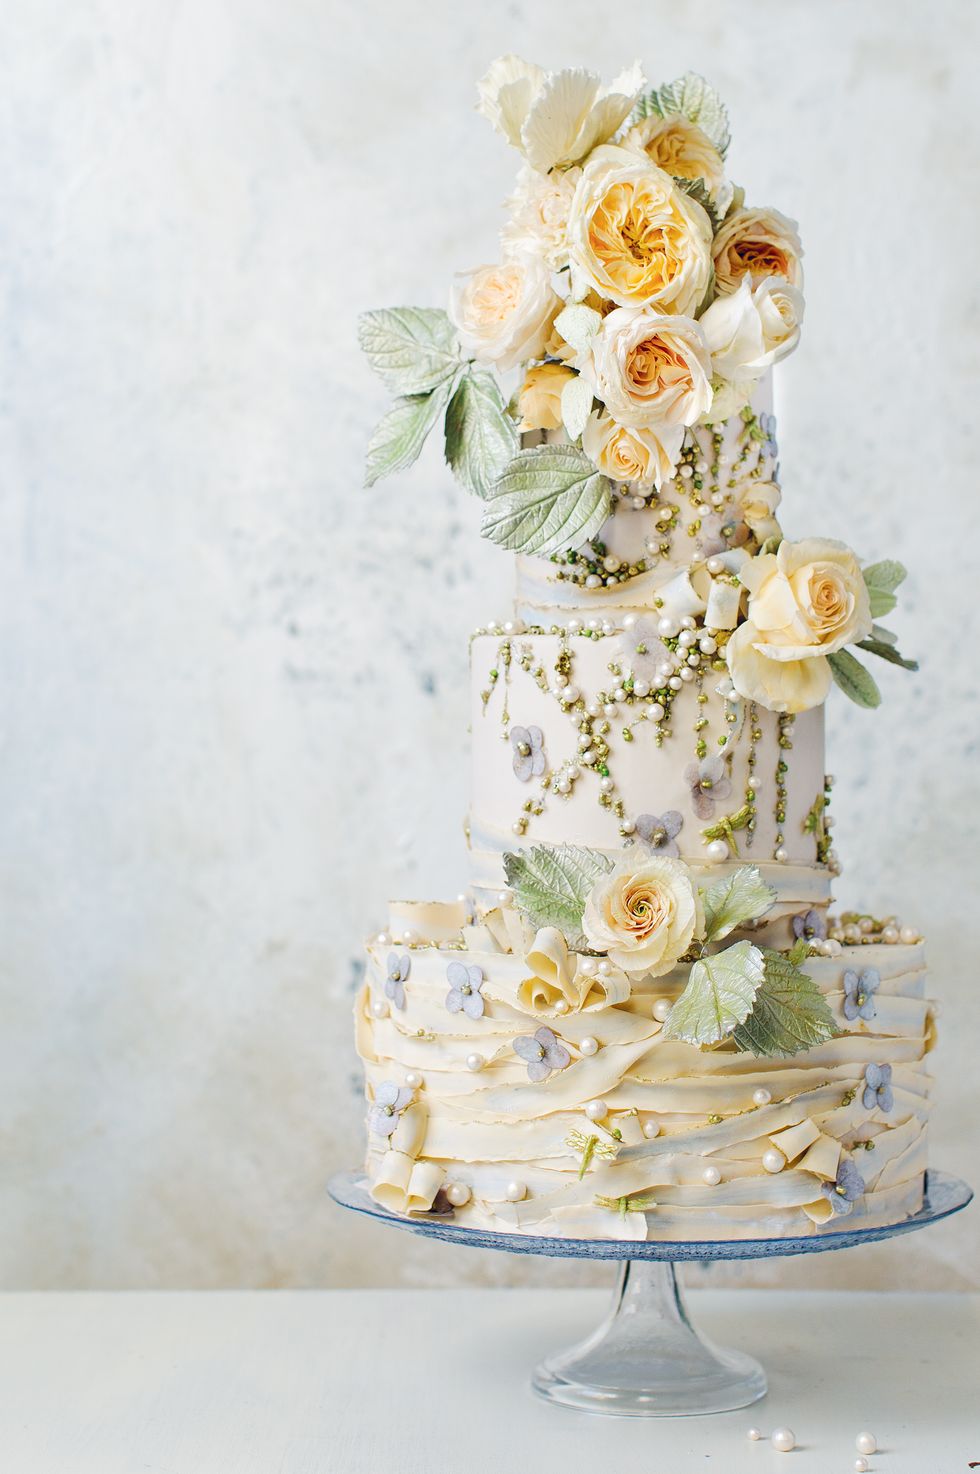 Summer Wedding Trends And Ideas: From Ceremony To The Cake